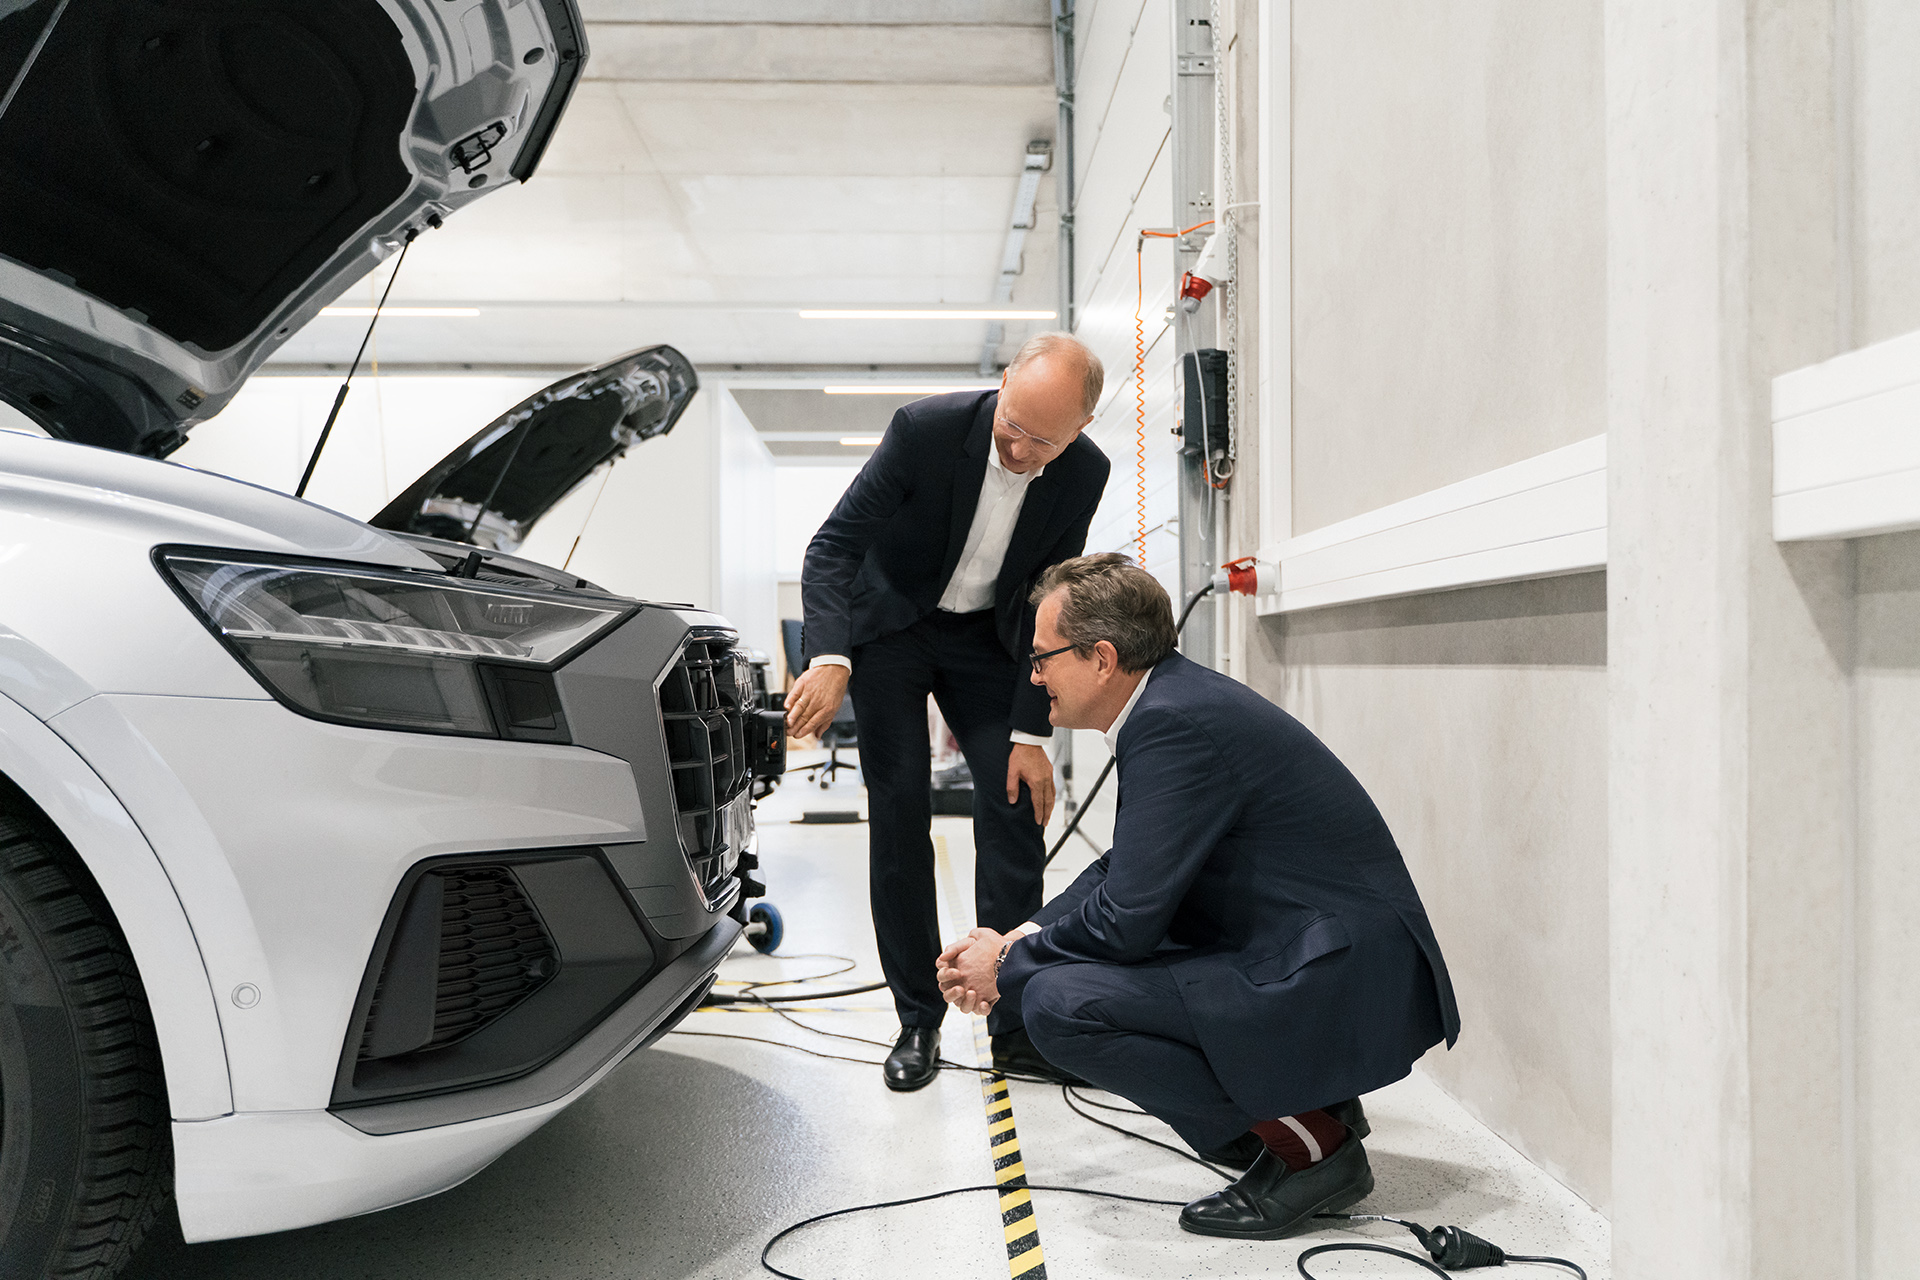 Prof. Christoph Lütge, Dr. Thomas Dahlem and Dr. Essayed Bouzouraa discuss sensor technology at the front end of an Audi model